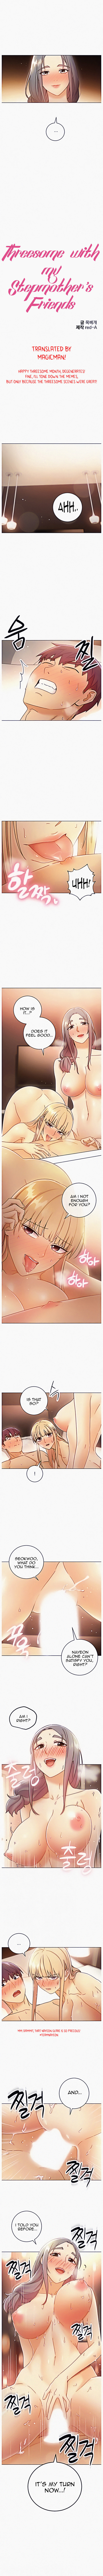 Panel Image 1 for chapter 48 of manhwa Stepmother